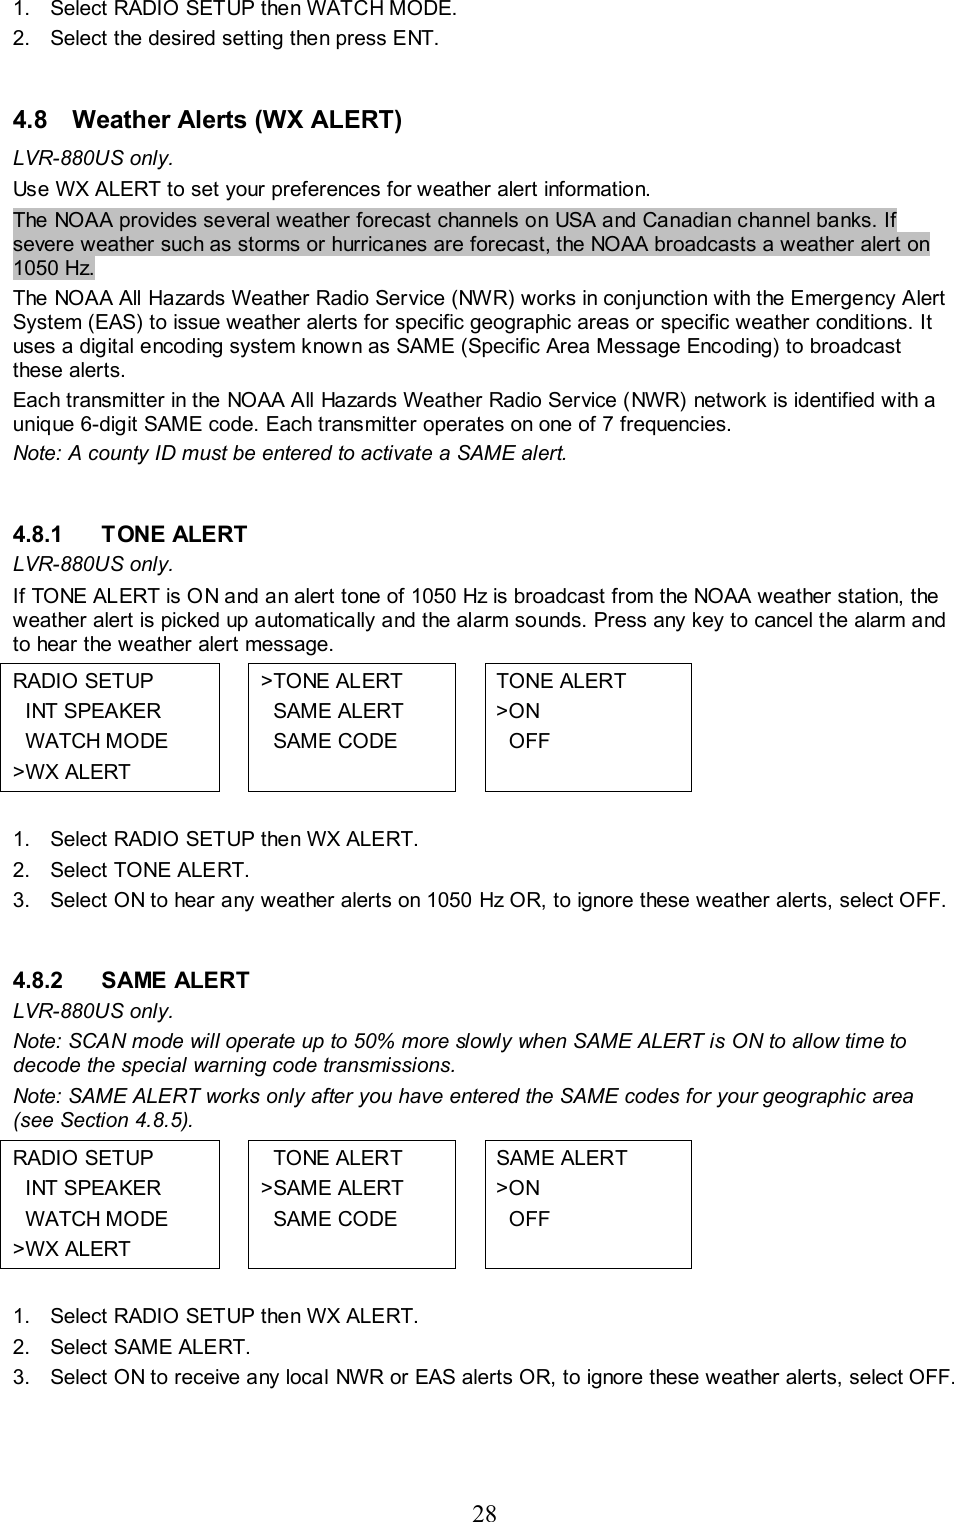 28  1.  Select RADIO SETUP then WATCH MODE. 2.  Select the desired setting then press ENT.  4.8  Weather Alerts (WX ALERT) LVR-880US only. Use WX ALERT to set your preferences for weather alert information.  The NOAA provides several weather forecast channels on USA and Canadian channel banks. If severe weather such as storms or hurricanes are forecast, the NOAA broadcasts a weather alert on 1050 Hz. The NOAA All Hazards Weather Radio Service (NWR) works in conjunction with the Emergency Alert System (EAS) to issue weather alerts for specific geographic areas or specific weather conditions. It uses a digital encoding system known as SAME (Specific Area Message Encoding) to broadcast these alerts.  Each transmitter in the NOAA All Hazards Weather Radio Service (NWR) network is identified with a unique 6-digit SAME code. Each transmitter operates on one of 7 frequencies. Note: A county ID must be entered to activate a SAME alert.  4.8.1 TONE ALERT LVR-880US only. If TONE ALERT is ON and an alert tone of 1050 Hz is broadcast from the NOAA weather station, the weather alert is picked up automatically and the alarm sounds. Press any key to cancel the alarm and to hear the weather alert message.  RADIO SETUP   INT SPEAKER   WATCH MODE &gt;WX ALERT  &gt;TONE ALERT   SAME ALERT   SAME CODE   TONE ALERT &gt;ON   OFF    1.  Select RADIO SETUP then WX ALERT.  2.  Select TONE ALERT.   3.  Select ON to hear any weather alerts on 1050 Hz OR, to ignore these weather alerts, select OFF.  4.8.2 SAME ALERT LVR-880US only. Note: SCAN mode will operate up to 50% more slowly when SAME ALERT is ON to allow time to decode the special warning code transmissions. Note: SAME ALERT works only after you have entered the SAME codes for your geographic area (see Section 4.8.5). RADIO SETUP   INT SPEAKER   WATCH MODE &gt;WX ALERT     TONE ALERT &gt;SAME ALERT   SAME CODE  SAME ALERT &gt;ON   OFF    1.  Select RADIO SETUP then WX ALERT.  2.  Select SAME ALERT.   3.  Select ON to receive any local NWR or EAS alerts OR, to ignore these weather alerts, select OFF.  